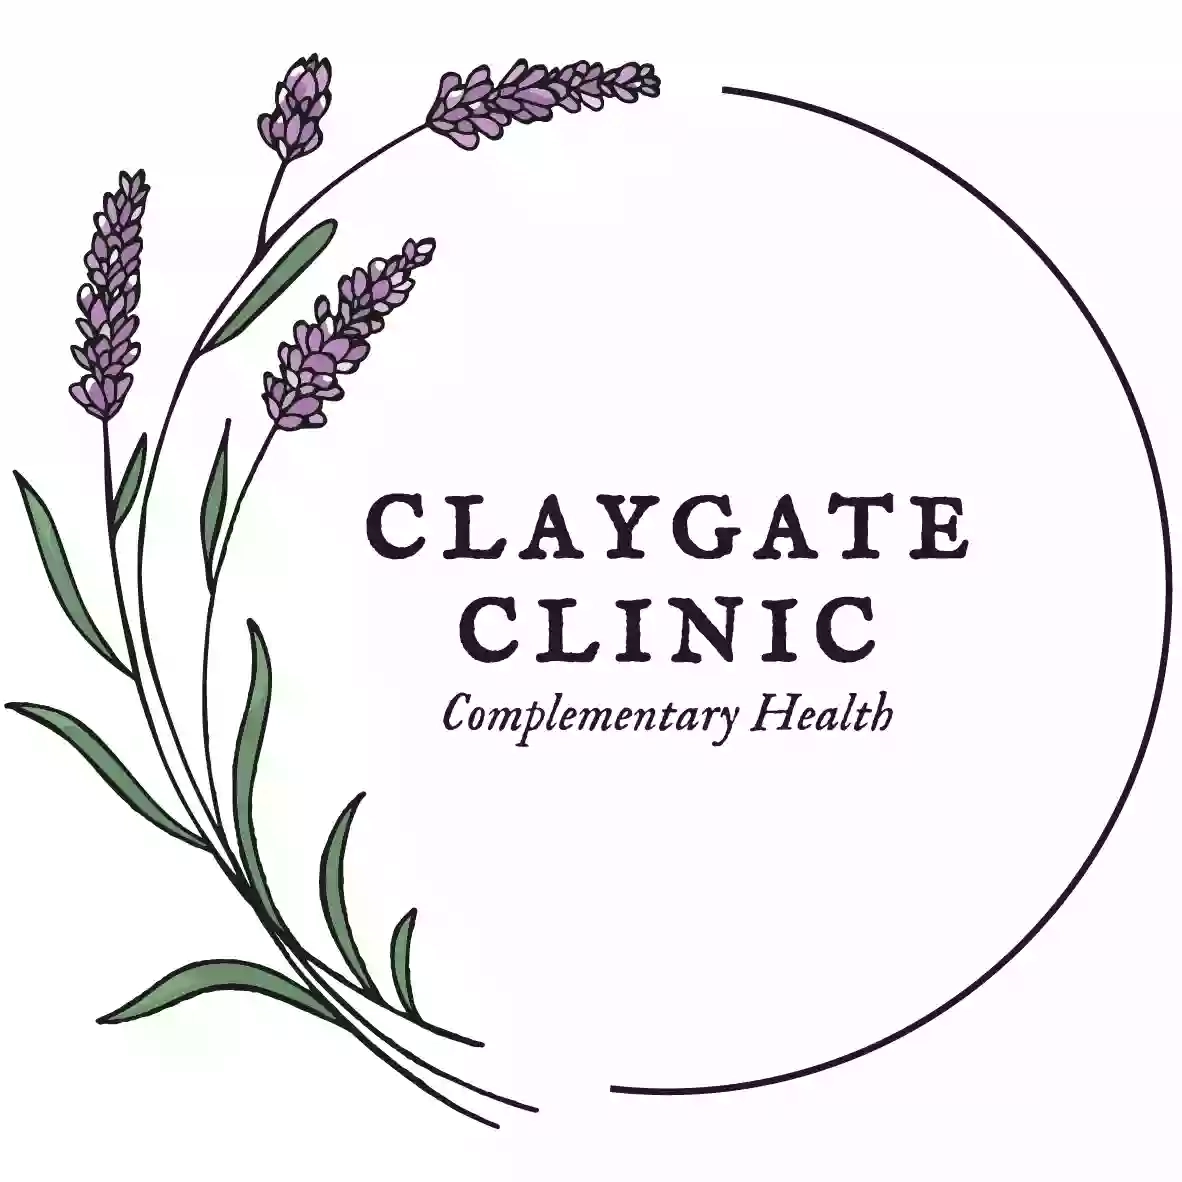 The Claygate Clinic